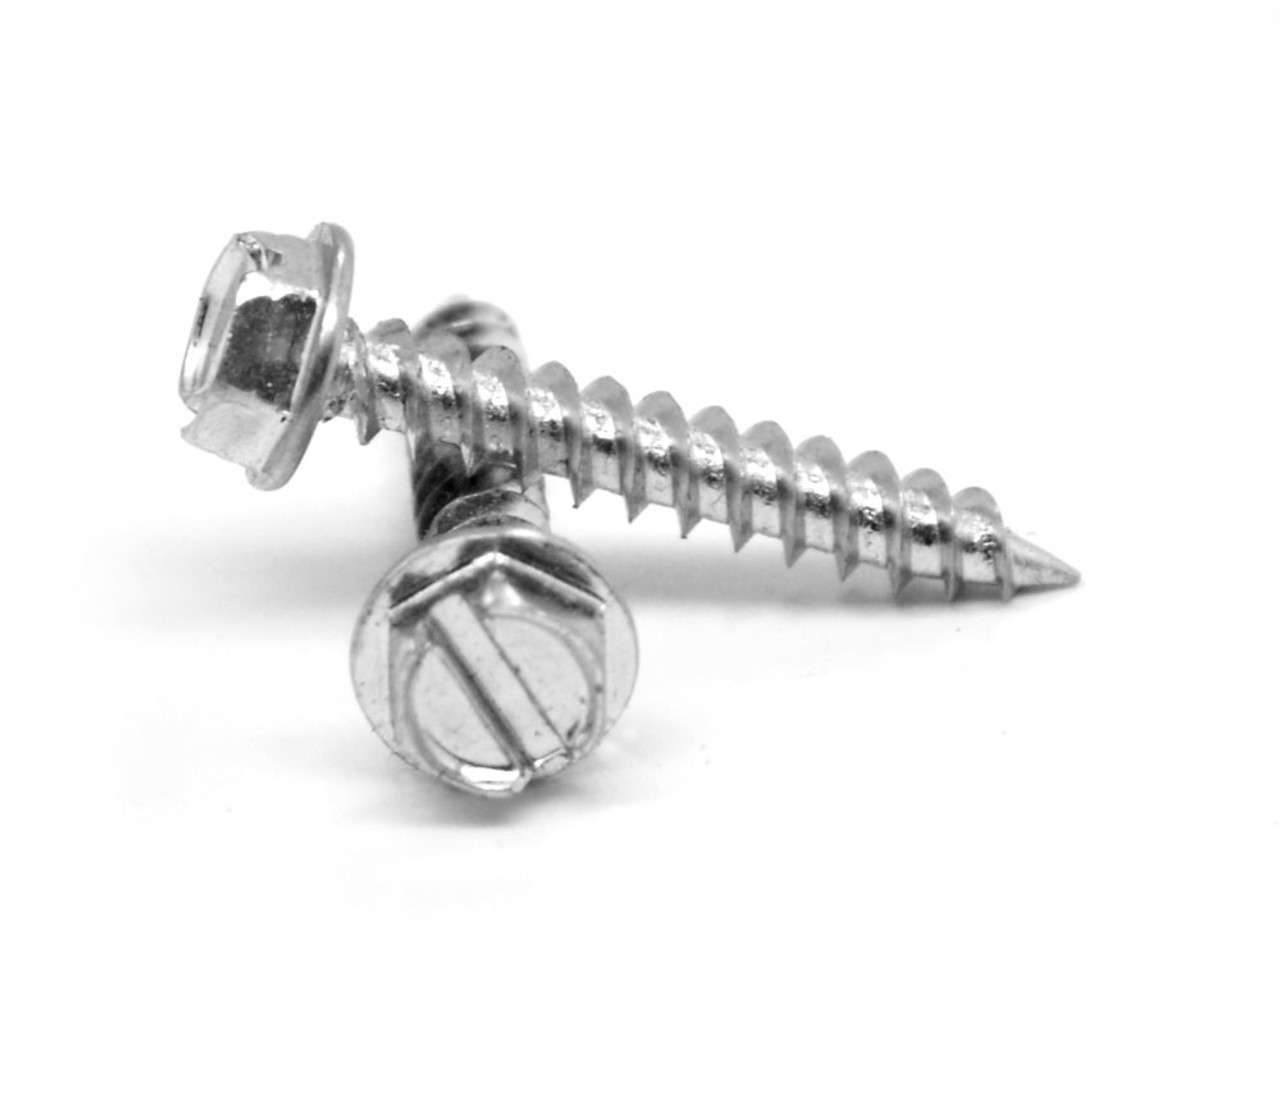 #8-15 x 1/2" (FT) 1/4" AF Self-Piercing Sheet Metal Screw Slotted Hex Washer Head Stainless Steel 410